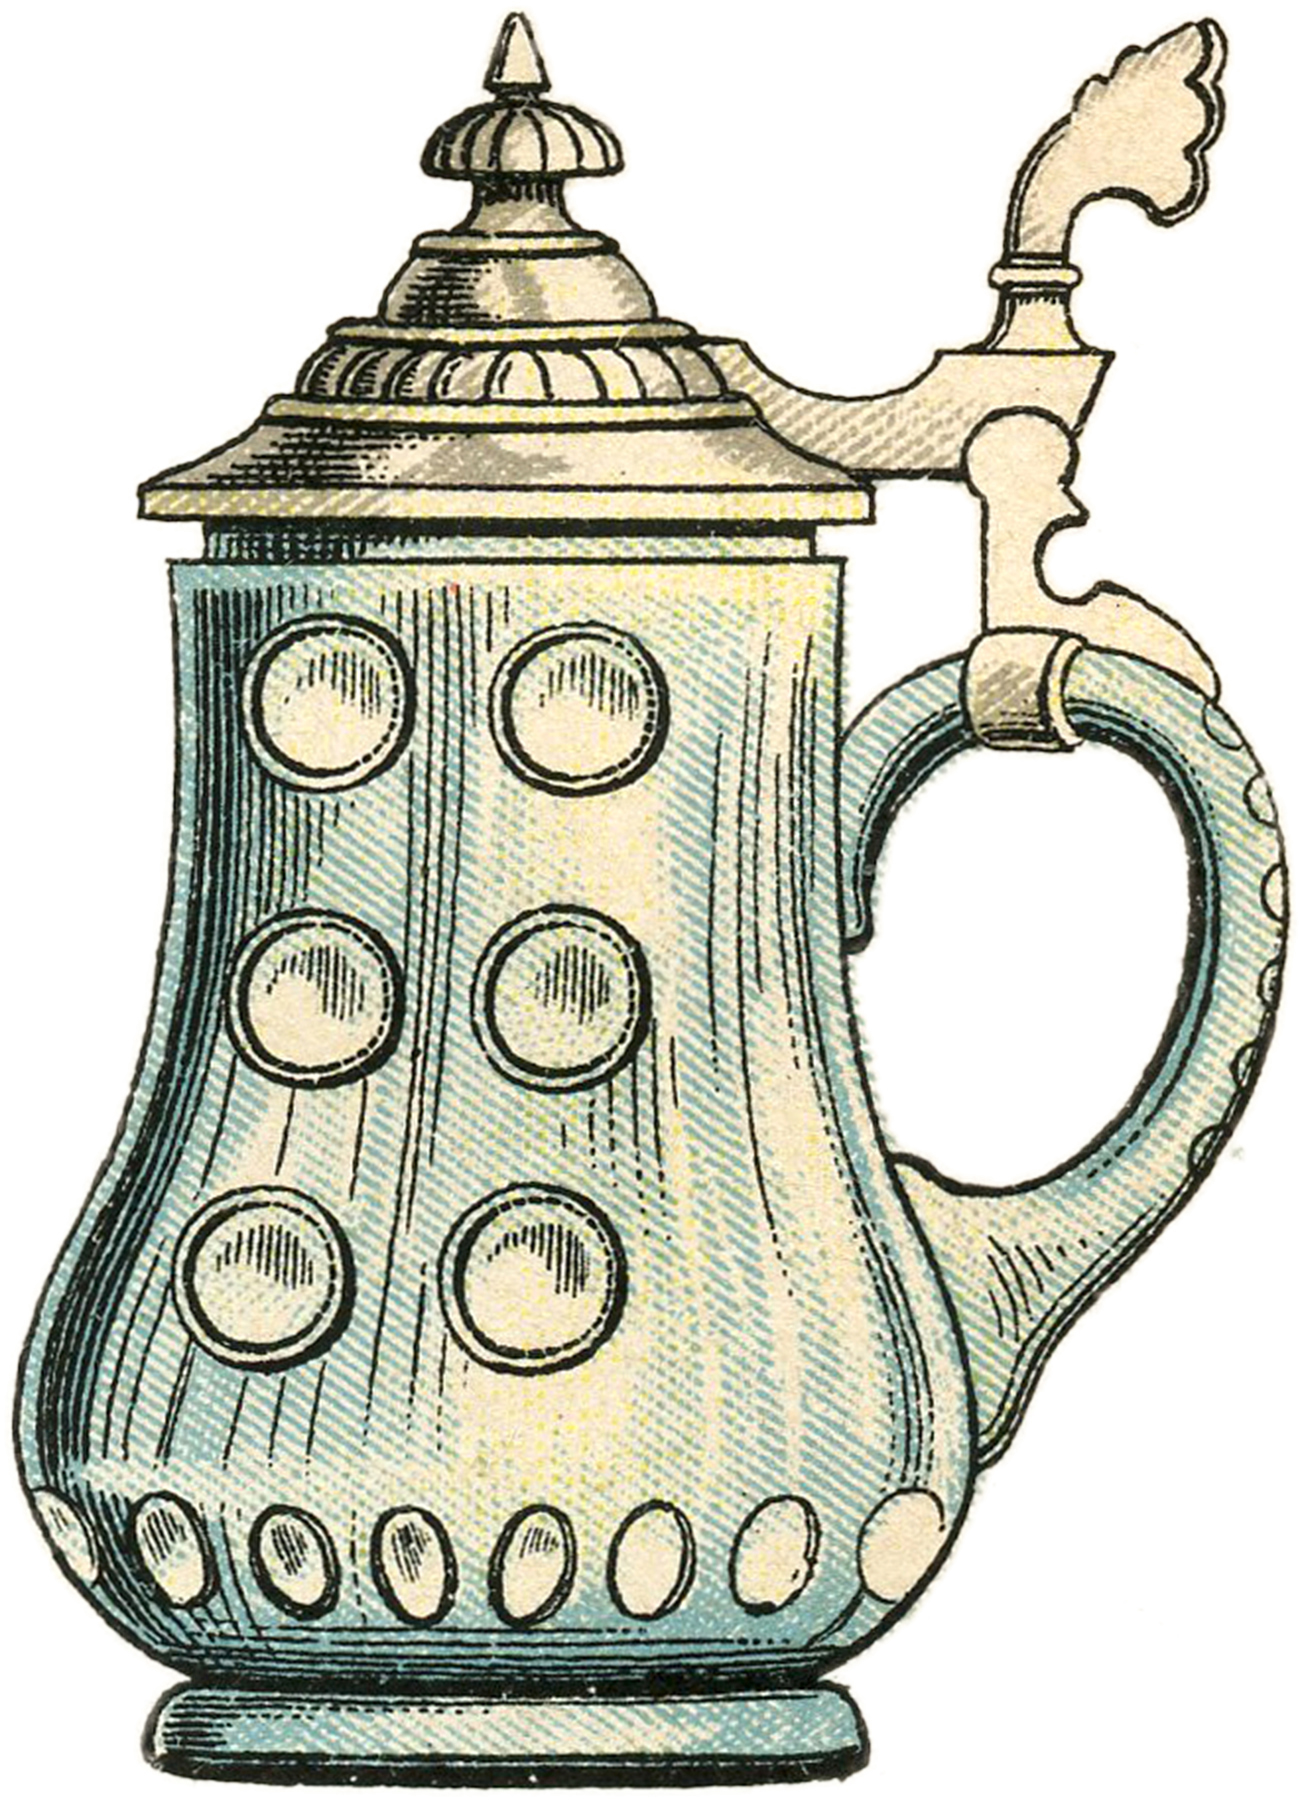 Public Domain Beer Stein Image - The Graphics Fairy